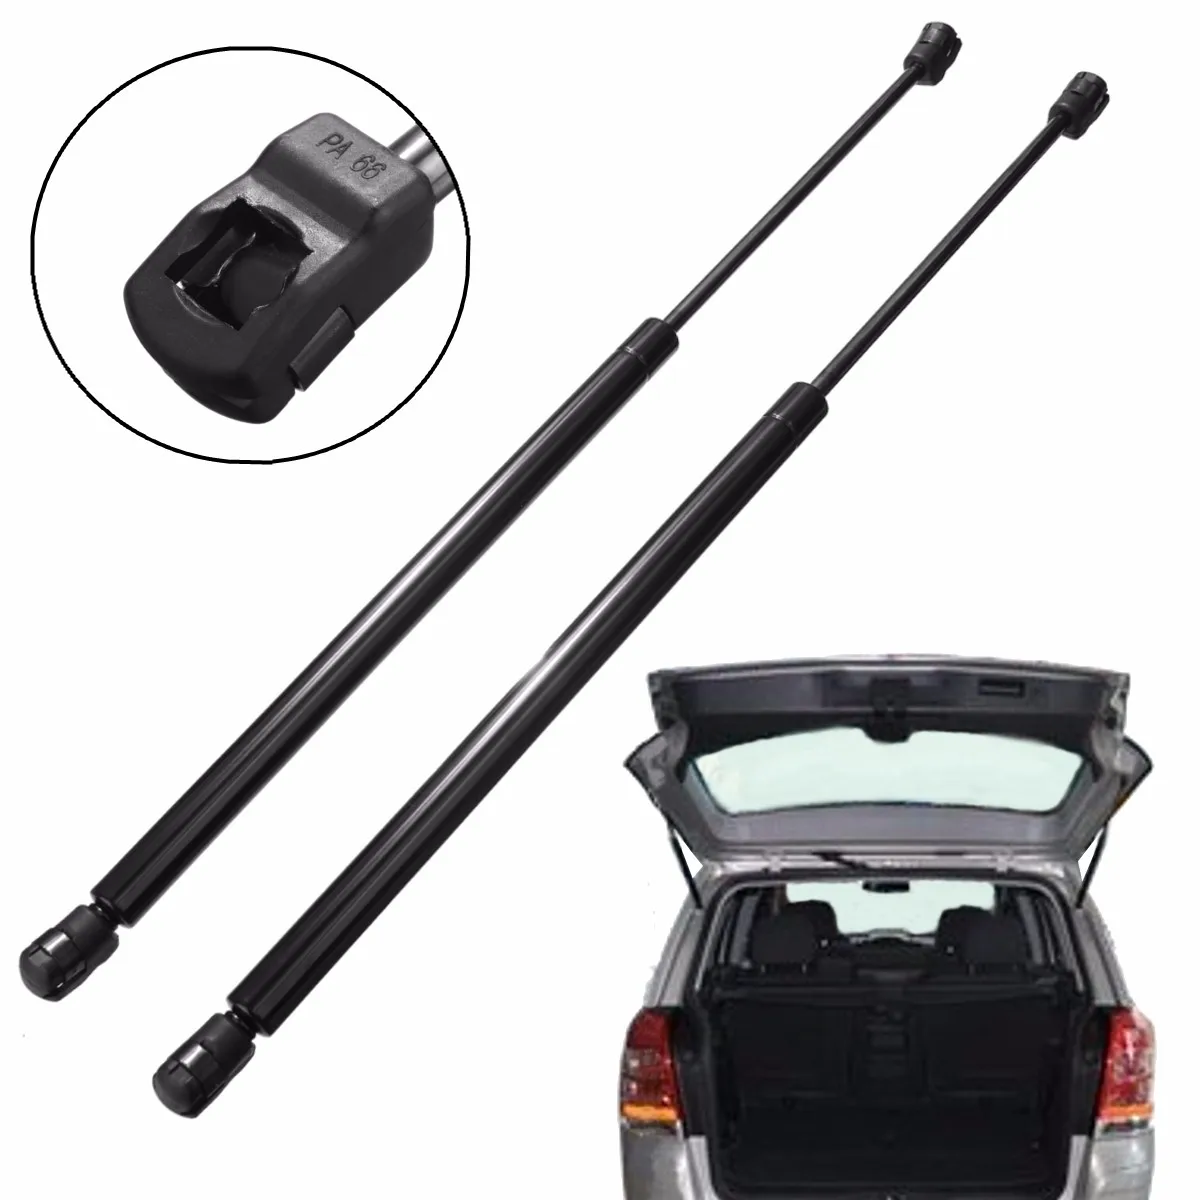 

2pcs Car Rear Tail Gate Gas Support Struts Boot Holders Lifter For Vauxhall Zafira A MK1 1998-2005